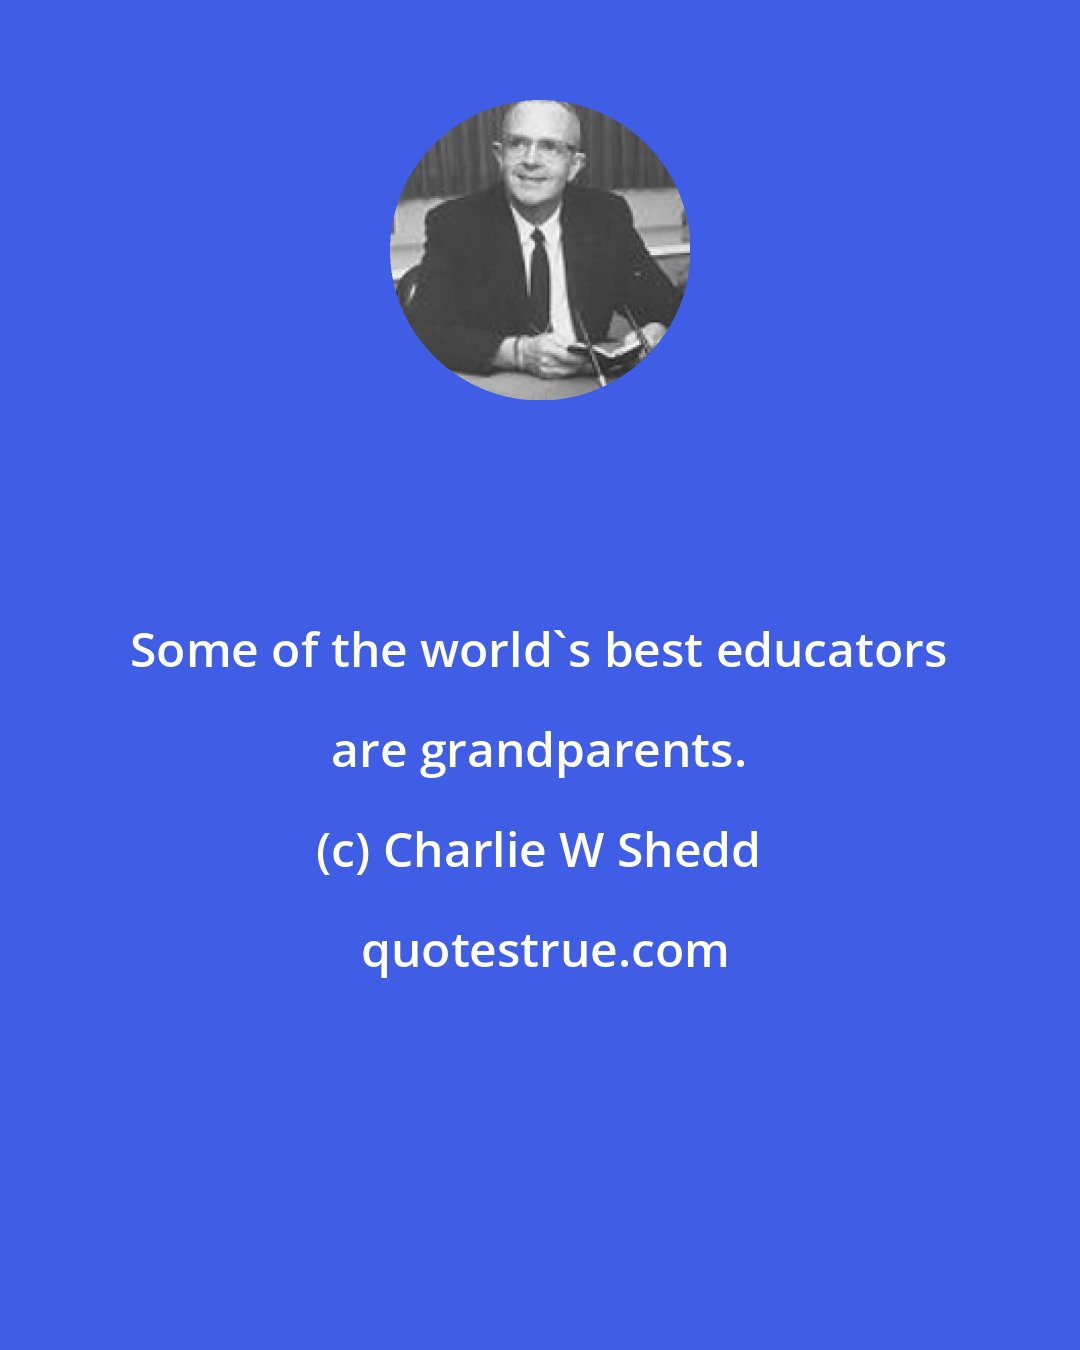 Charlie W Shedd: Some of the world's best educators are grandparents.